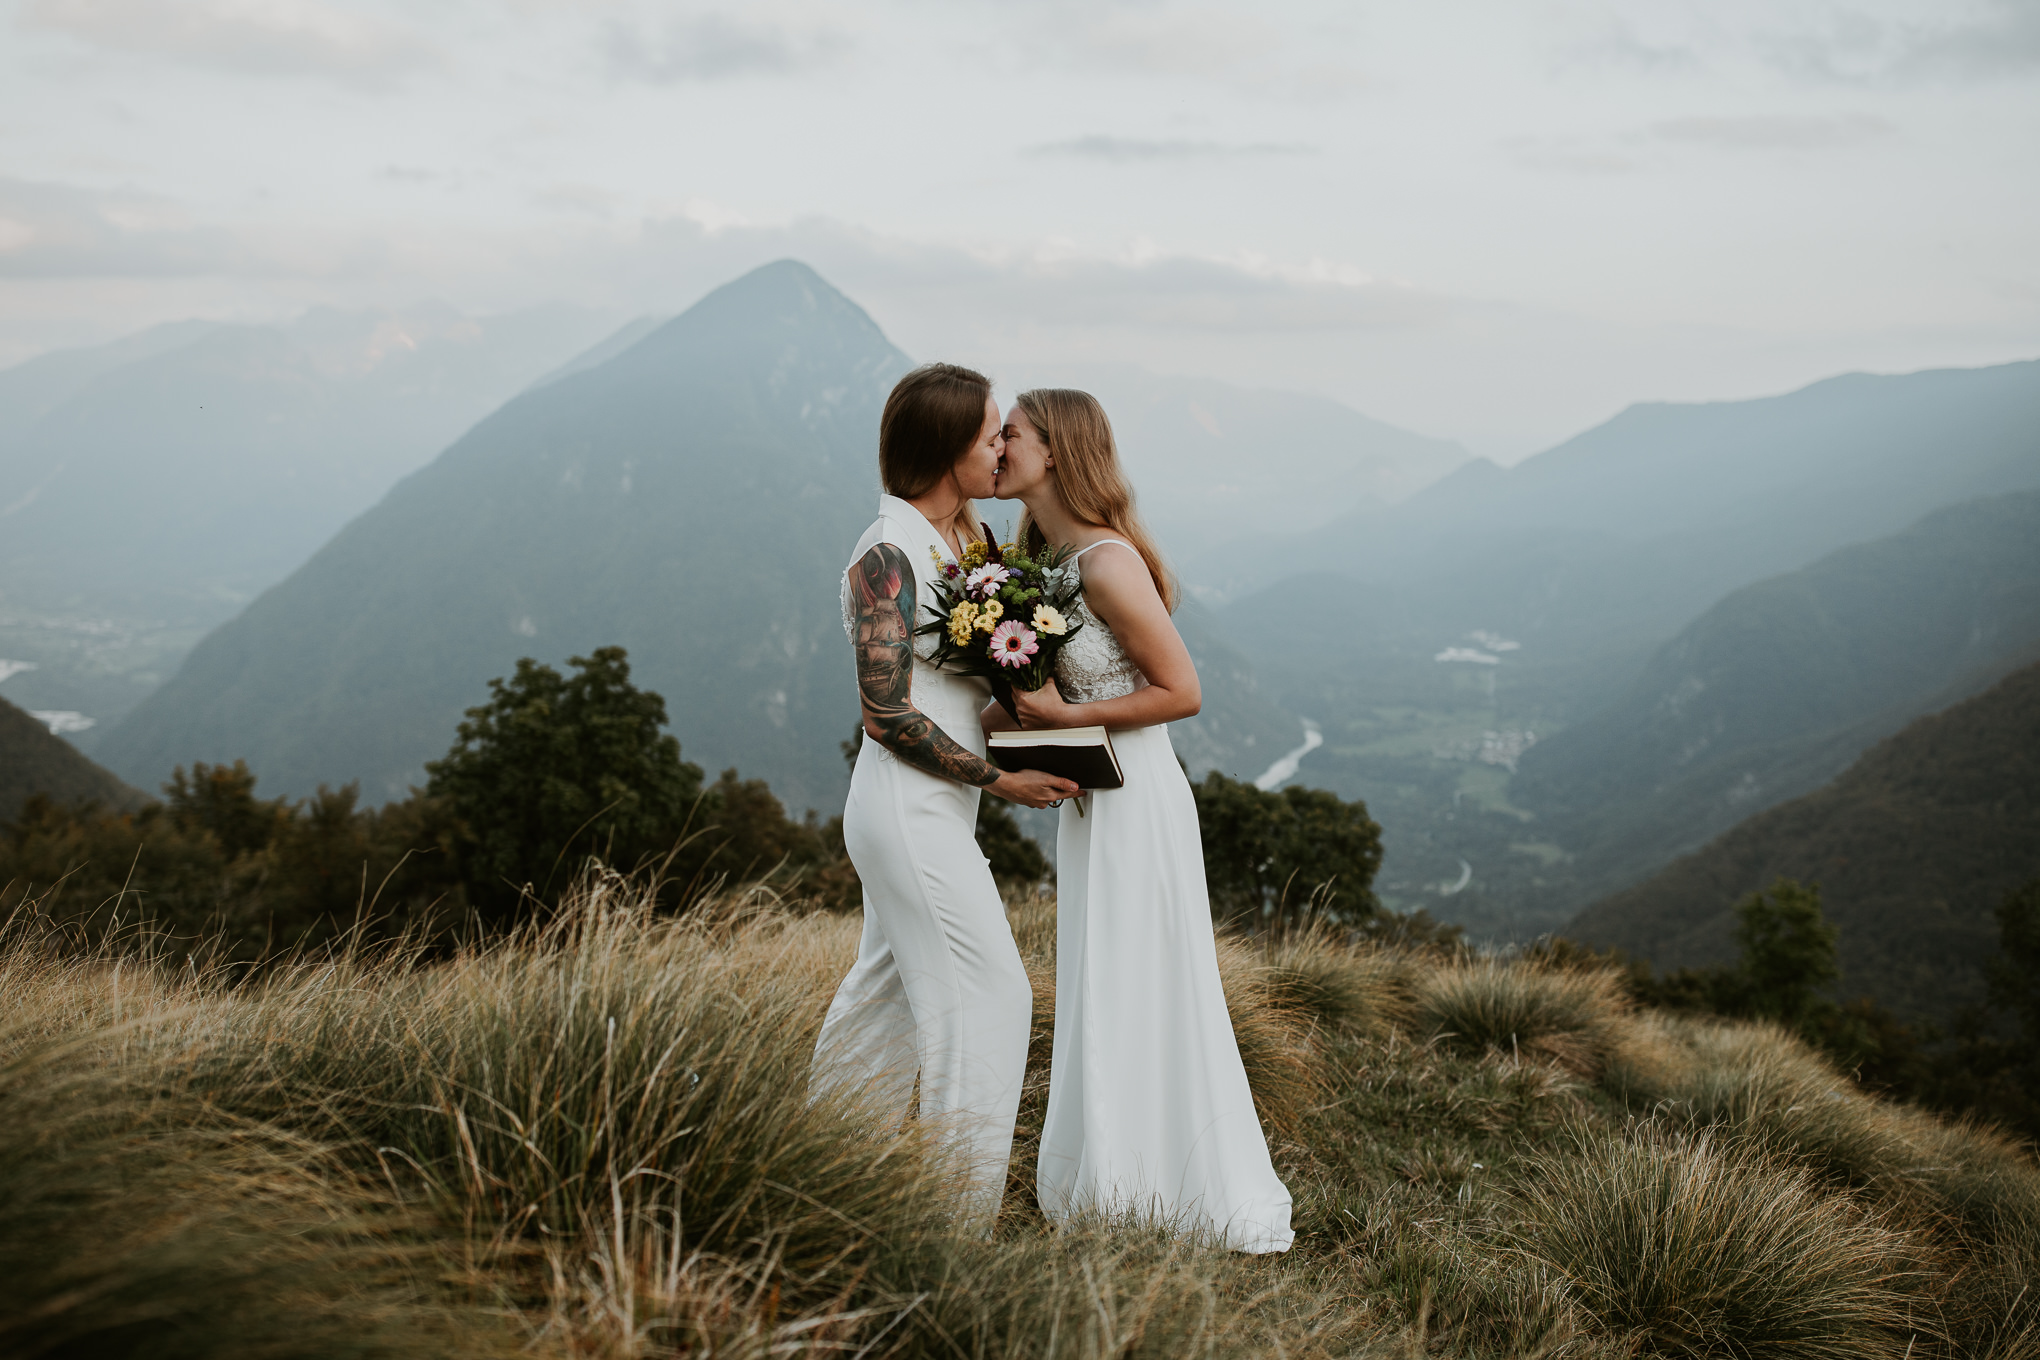 A couple kiss after their vow ceremony during their Slovenian Alps mountain elopement.